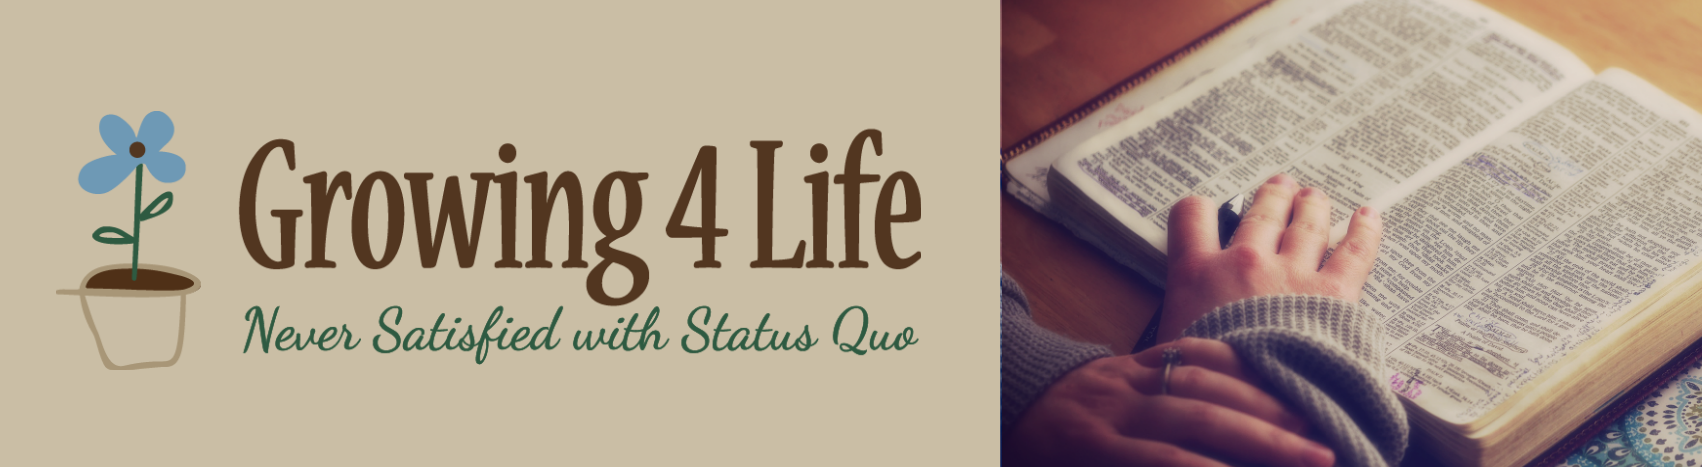 Growing 4 Life - Never Satisfied With Status Quo